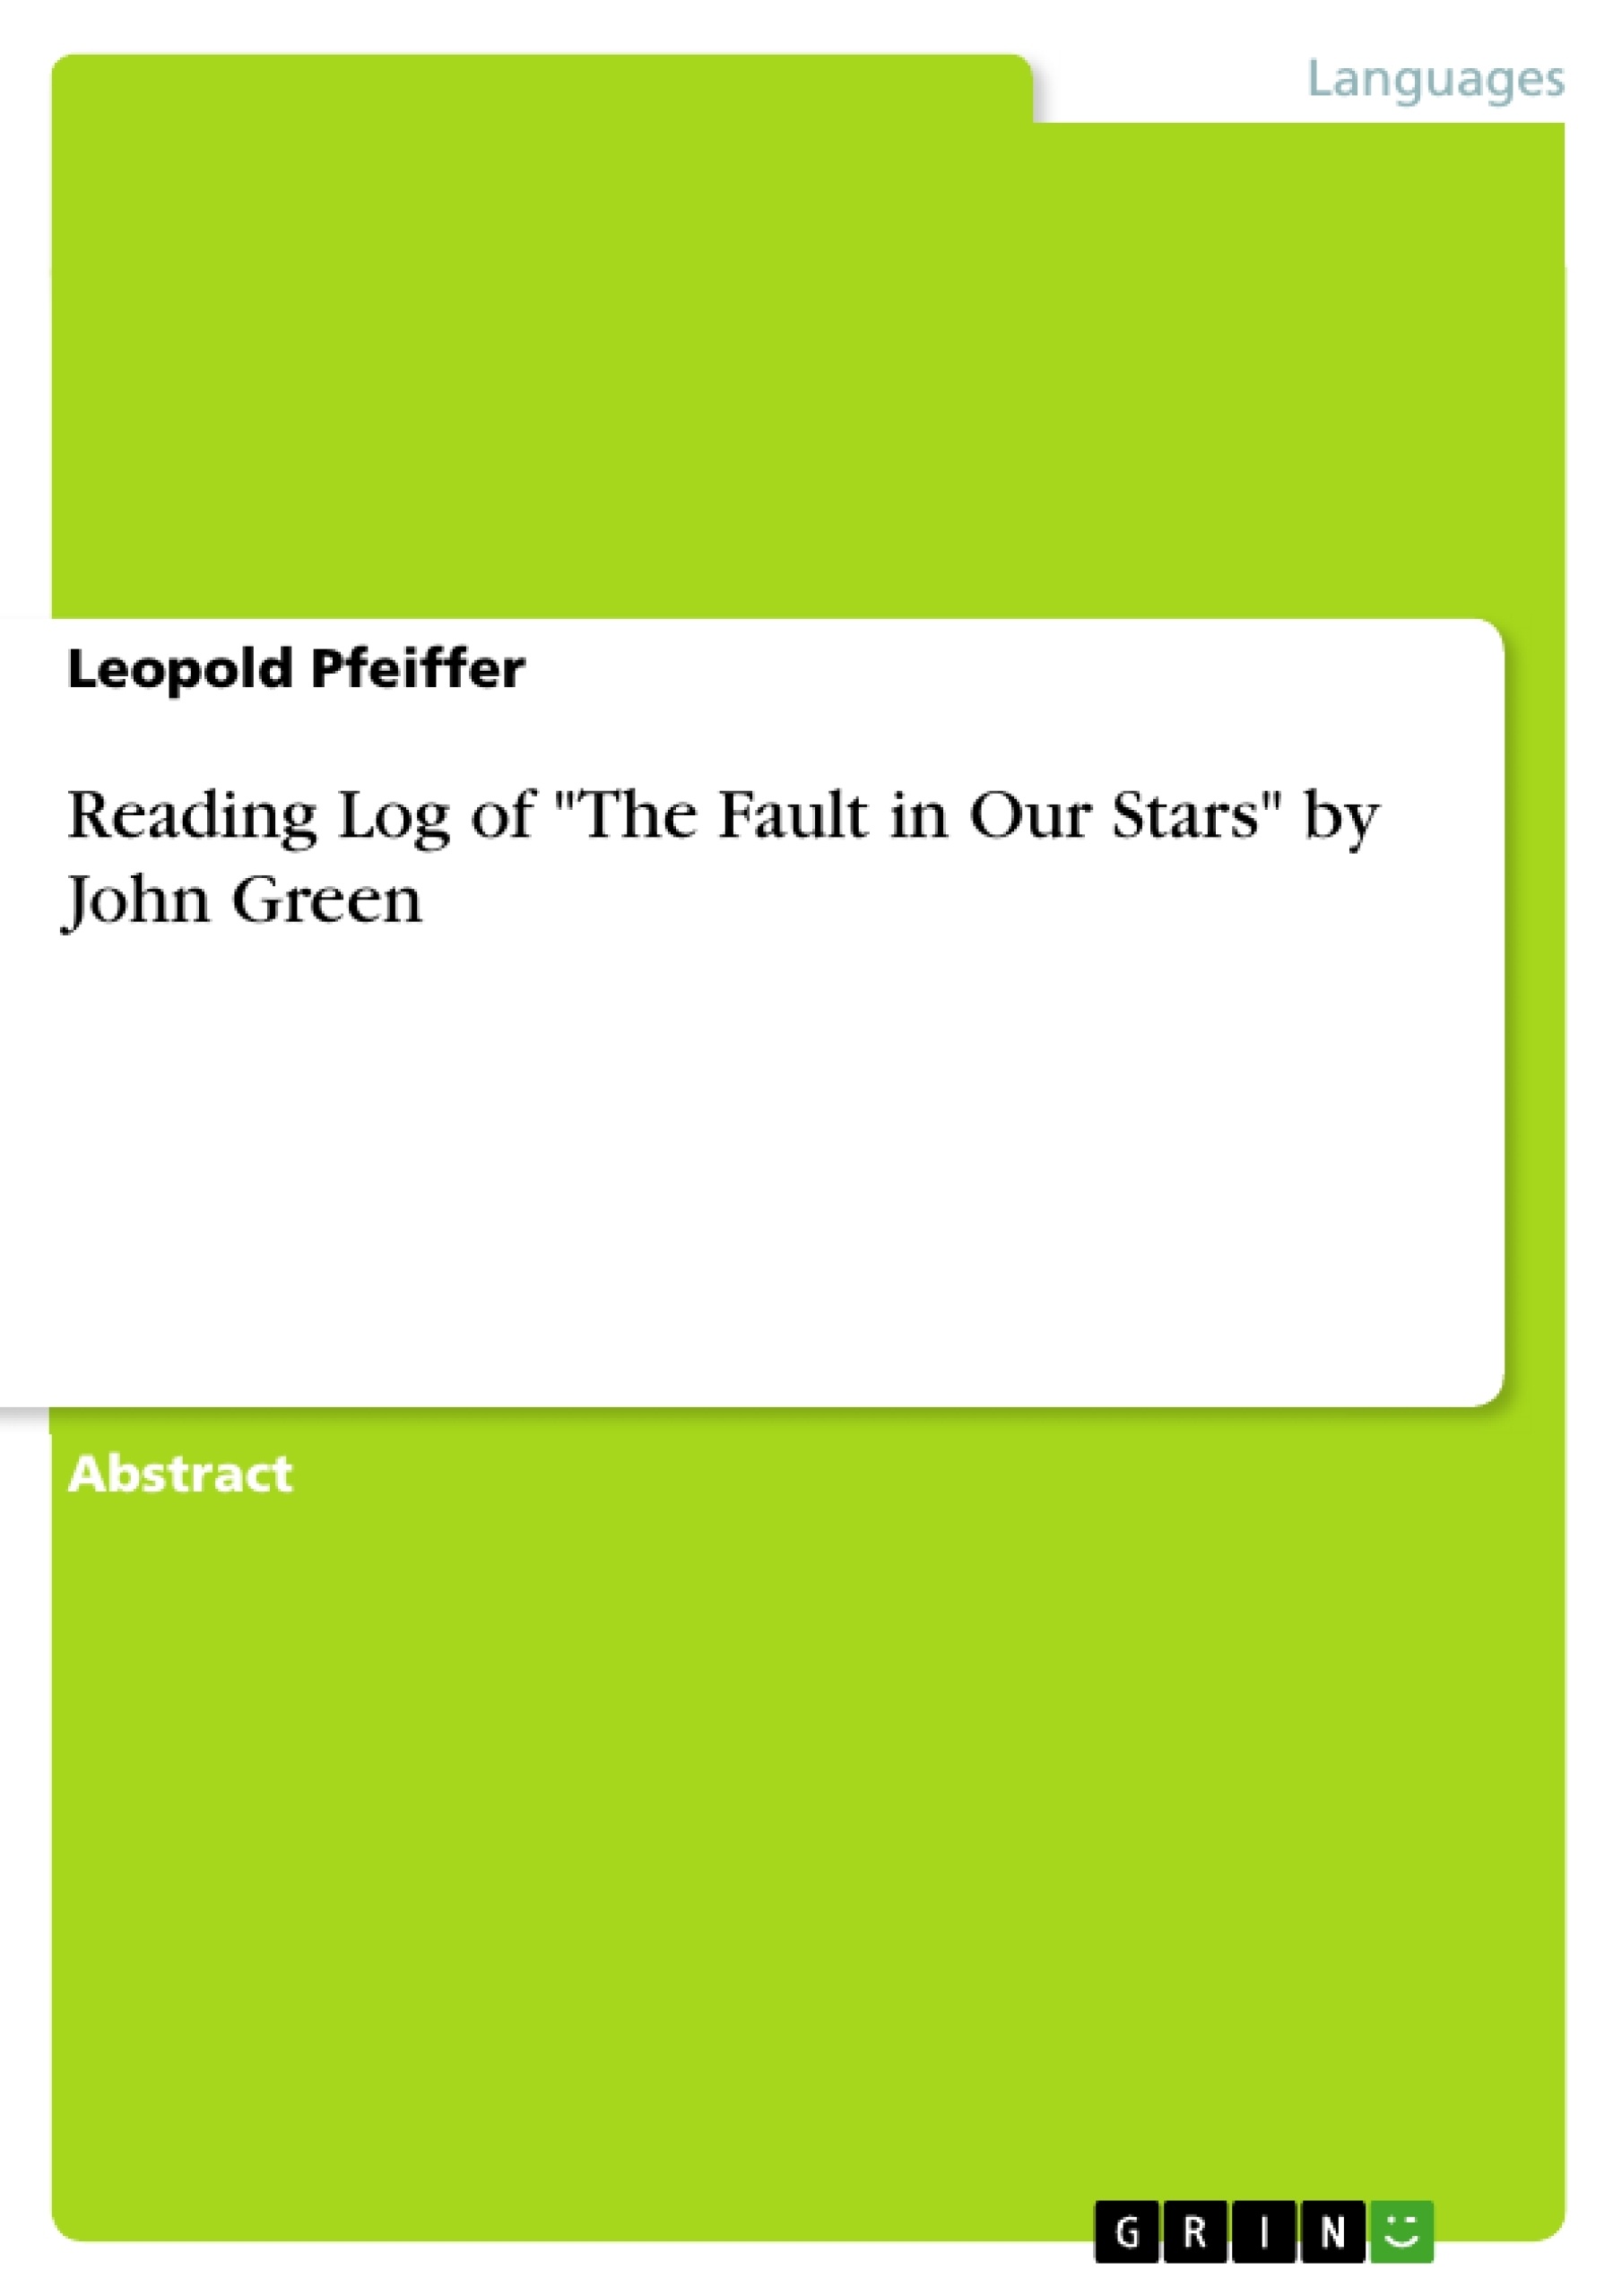 Title: Reading Log of "The Fault in Our Stars" by John Green